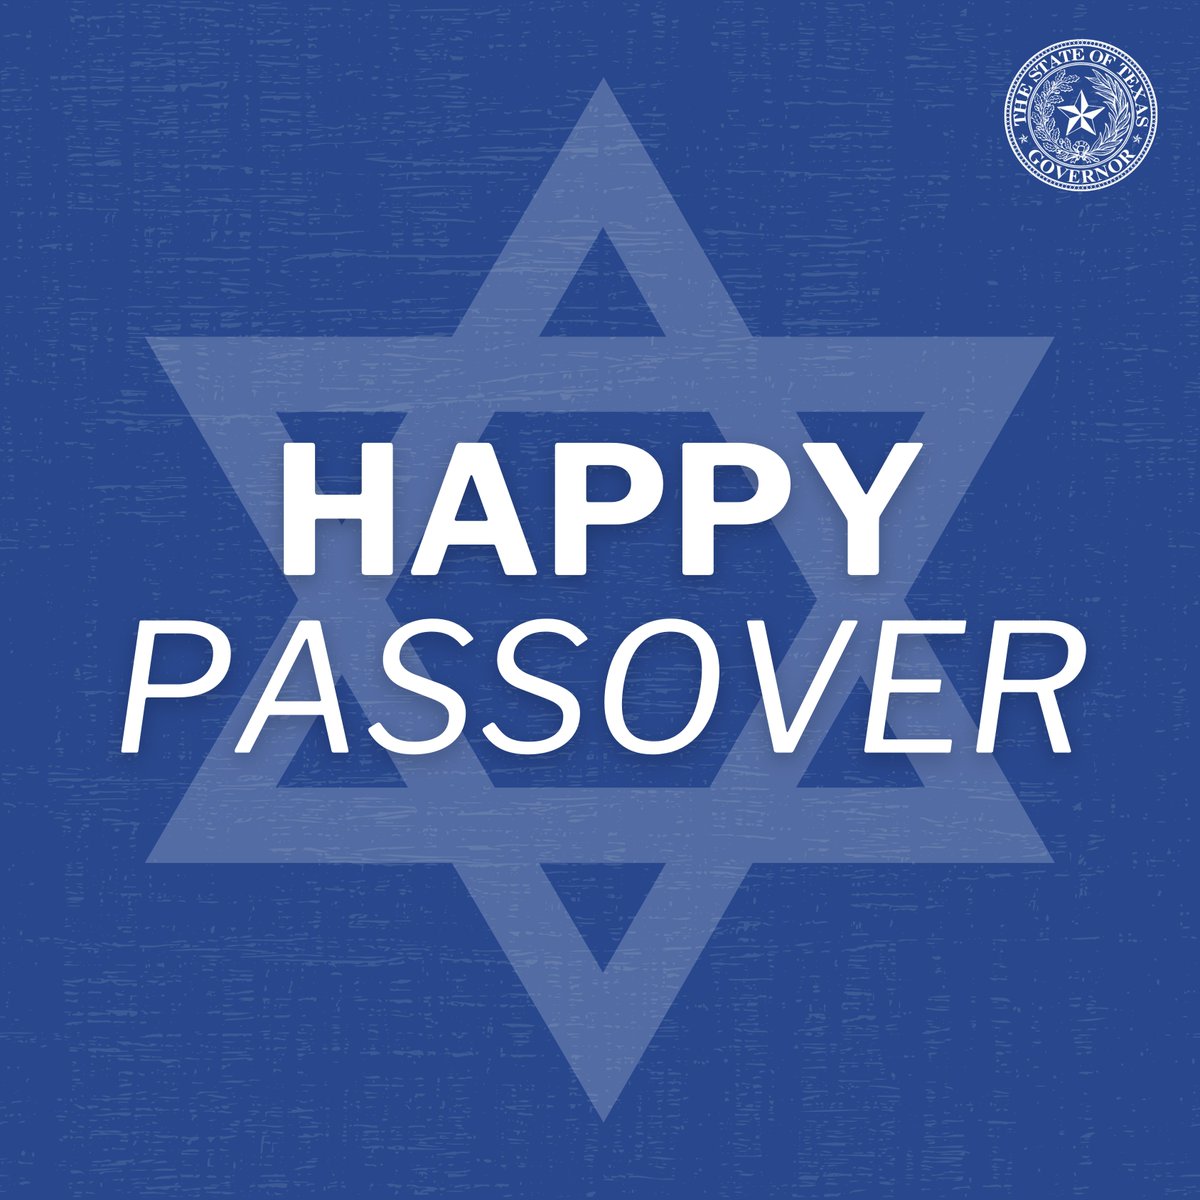 Happy Passover, Texas. Cecilia and I wish all those who celebrate good health, peace, and prosperity—today and always.